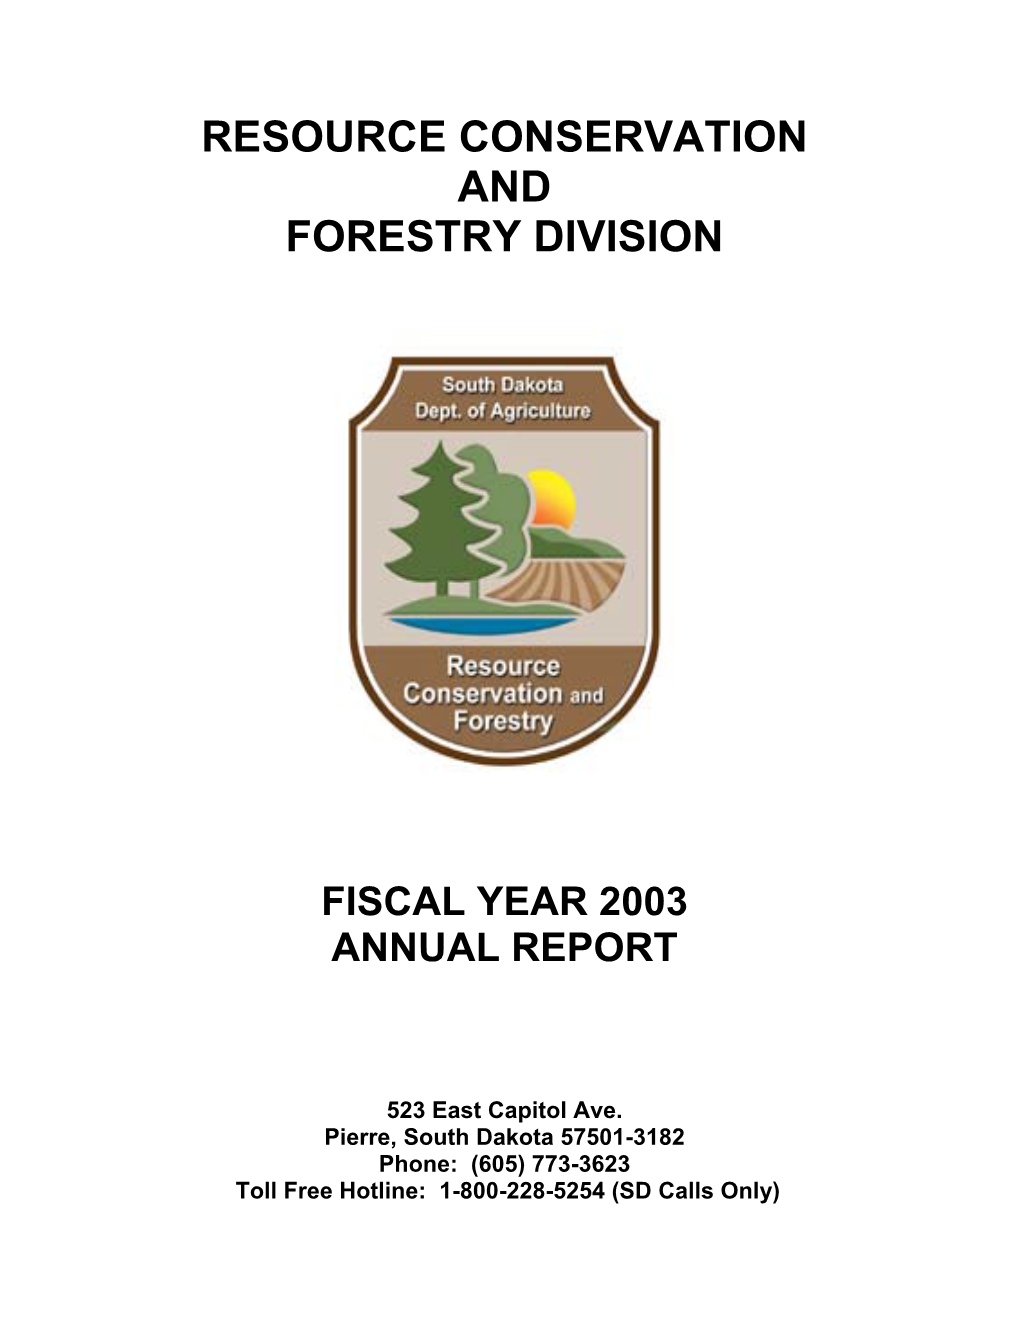 Resource Conservation and Forestry Division